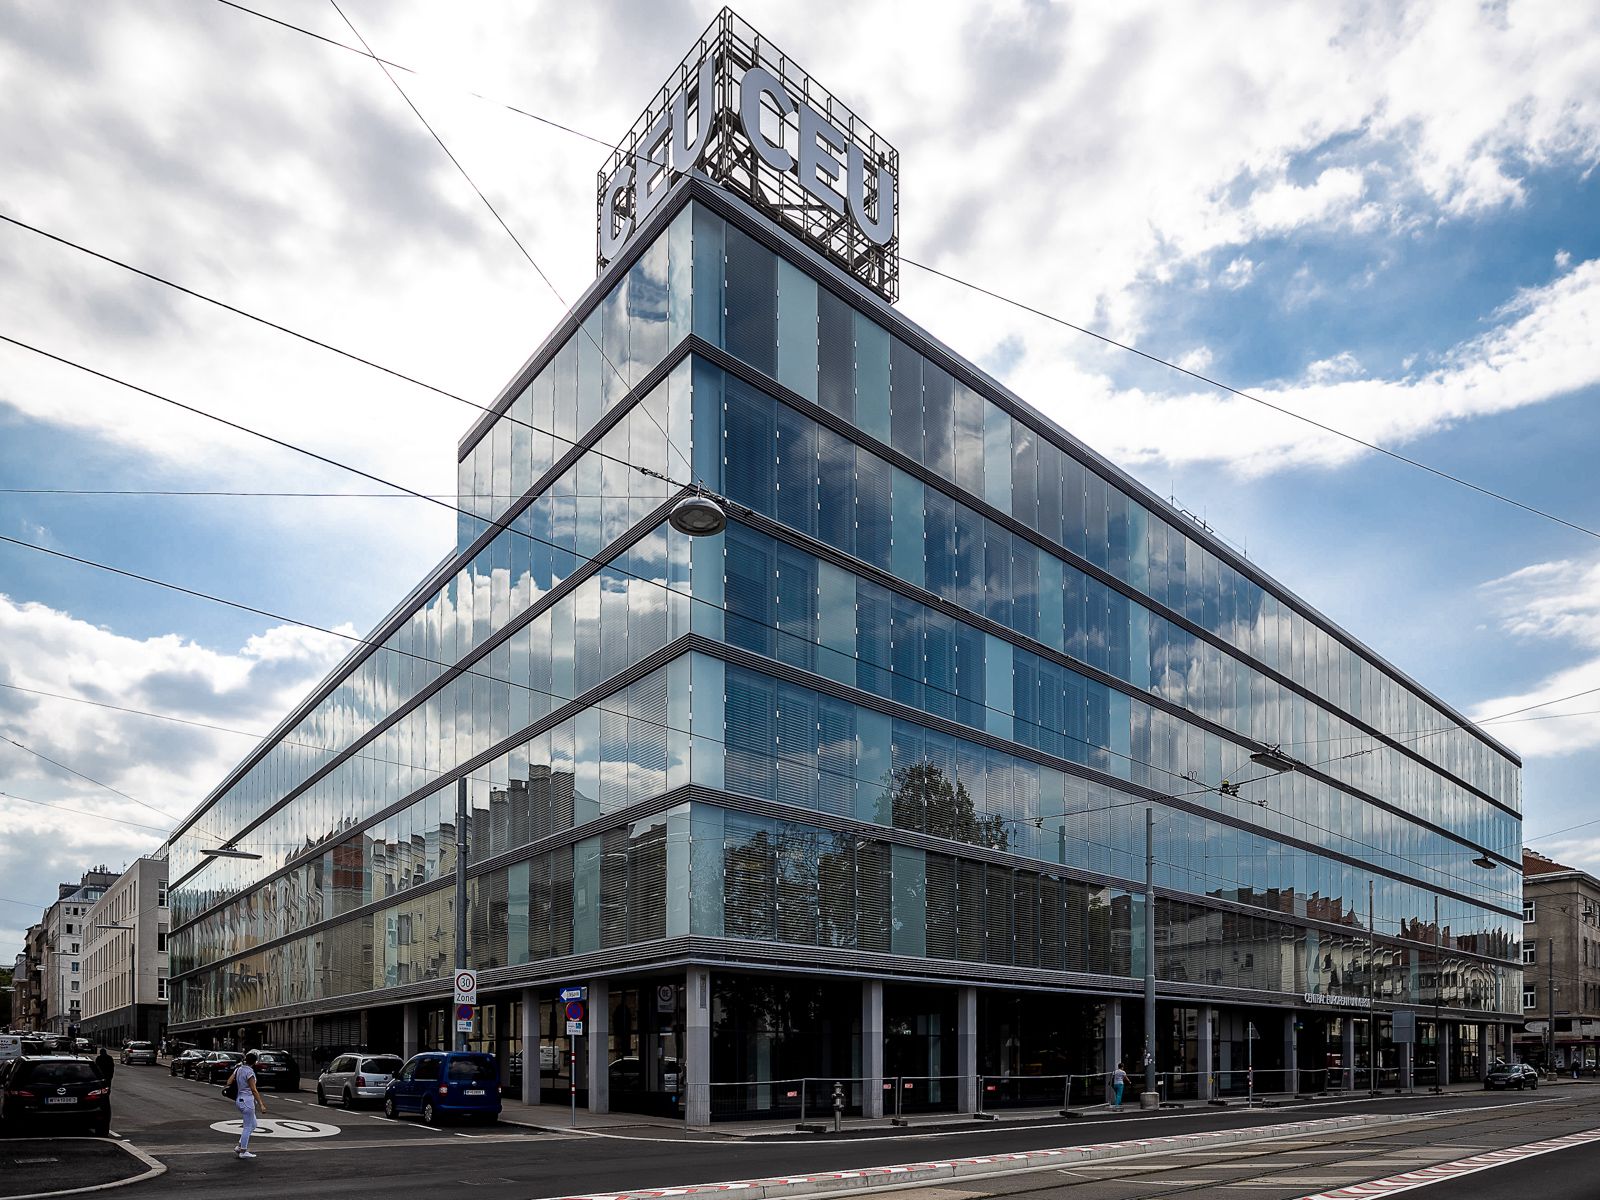 A large glass building with "CEU" in letters on the top.